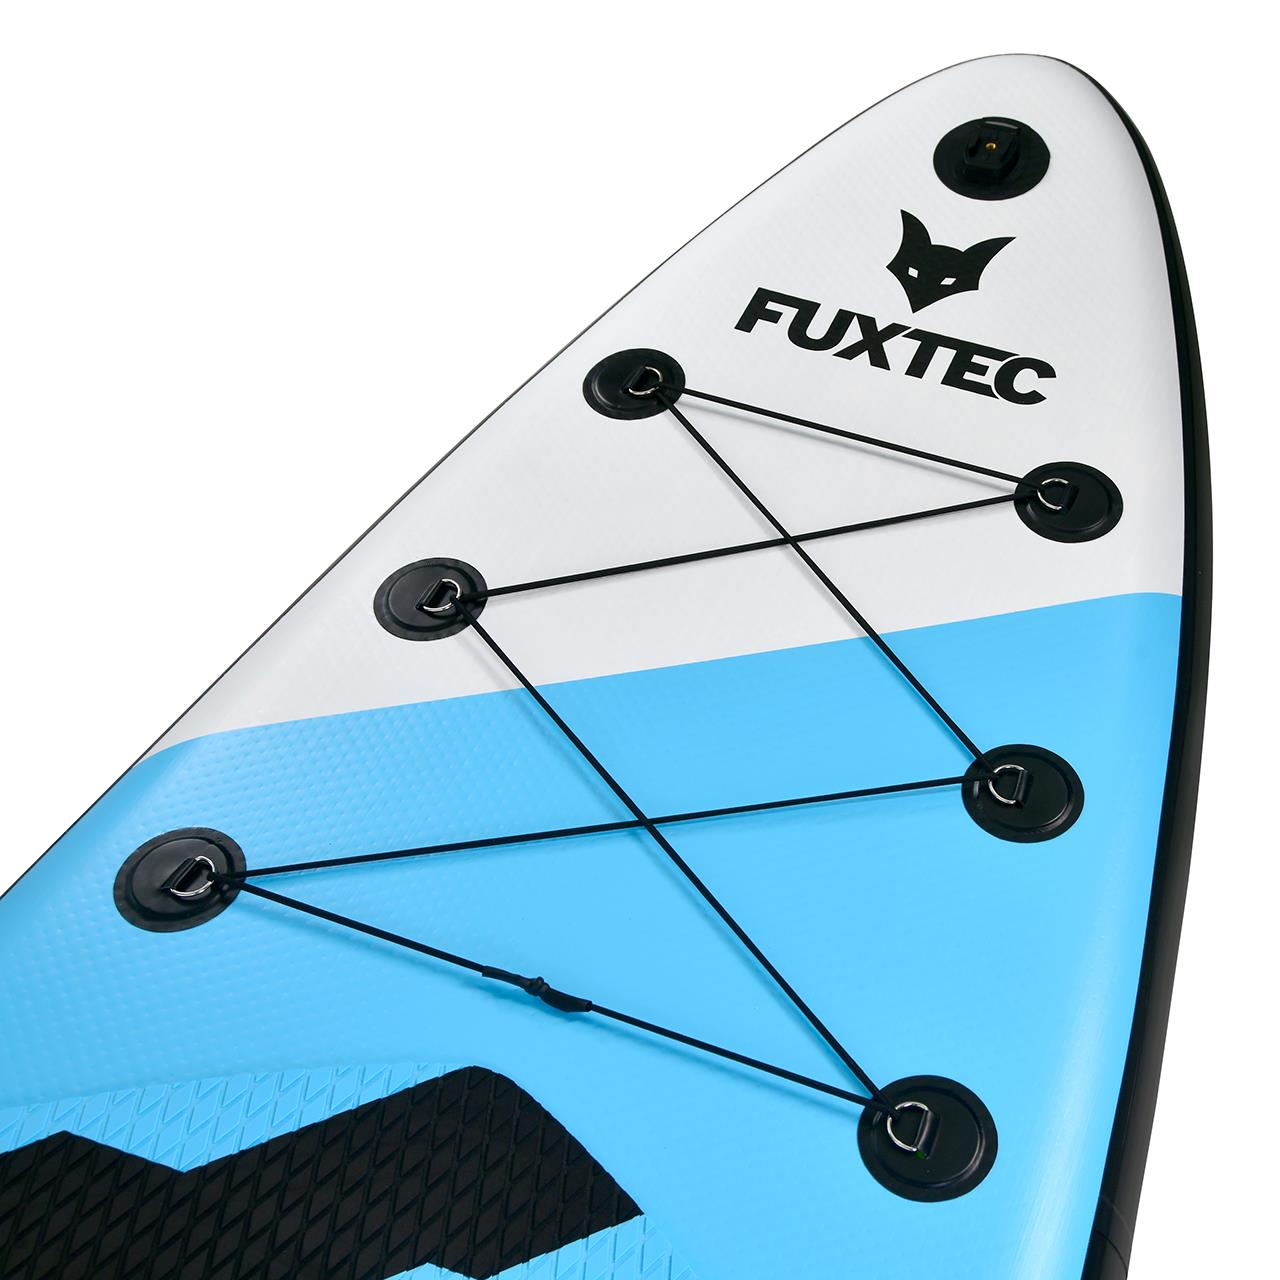 Stand Up Paddle Board gonflable FUXTEC Sea Cruiser